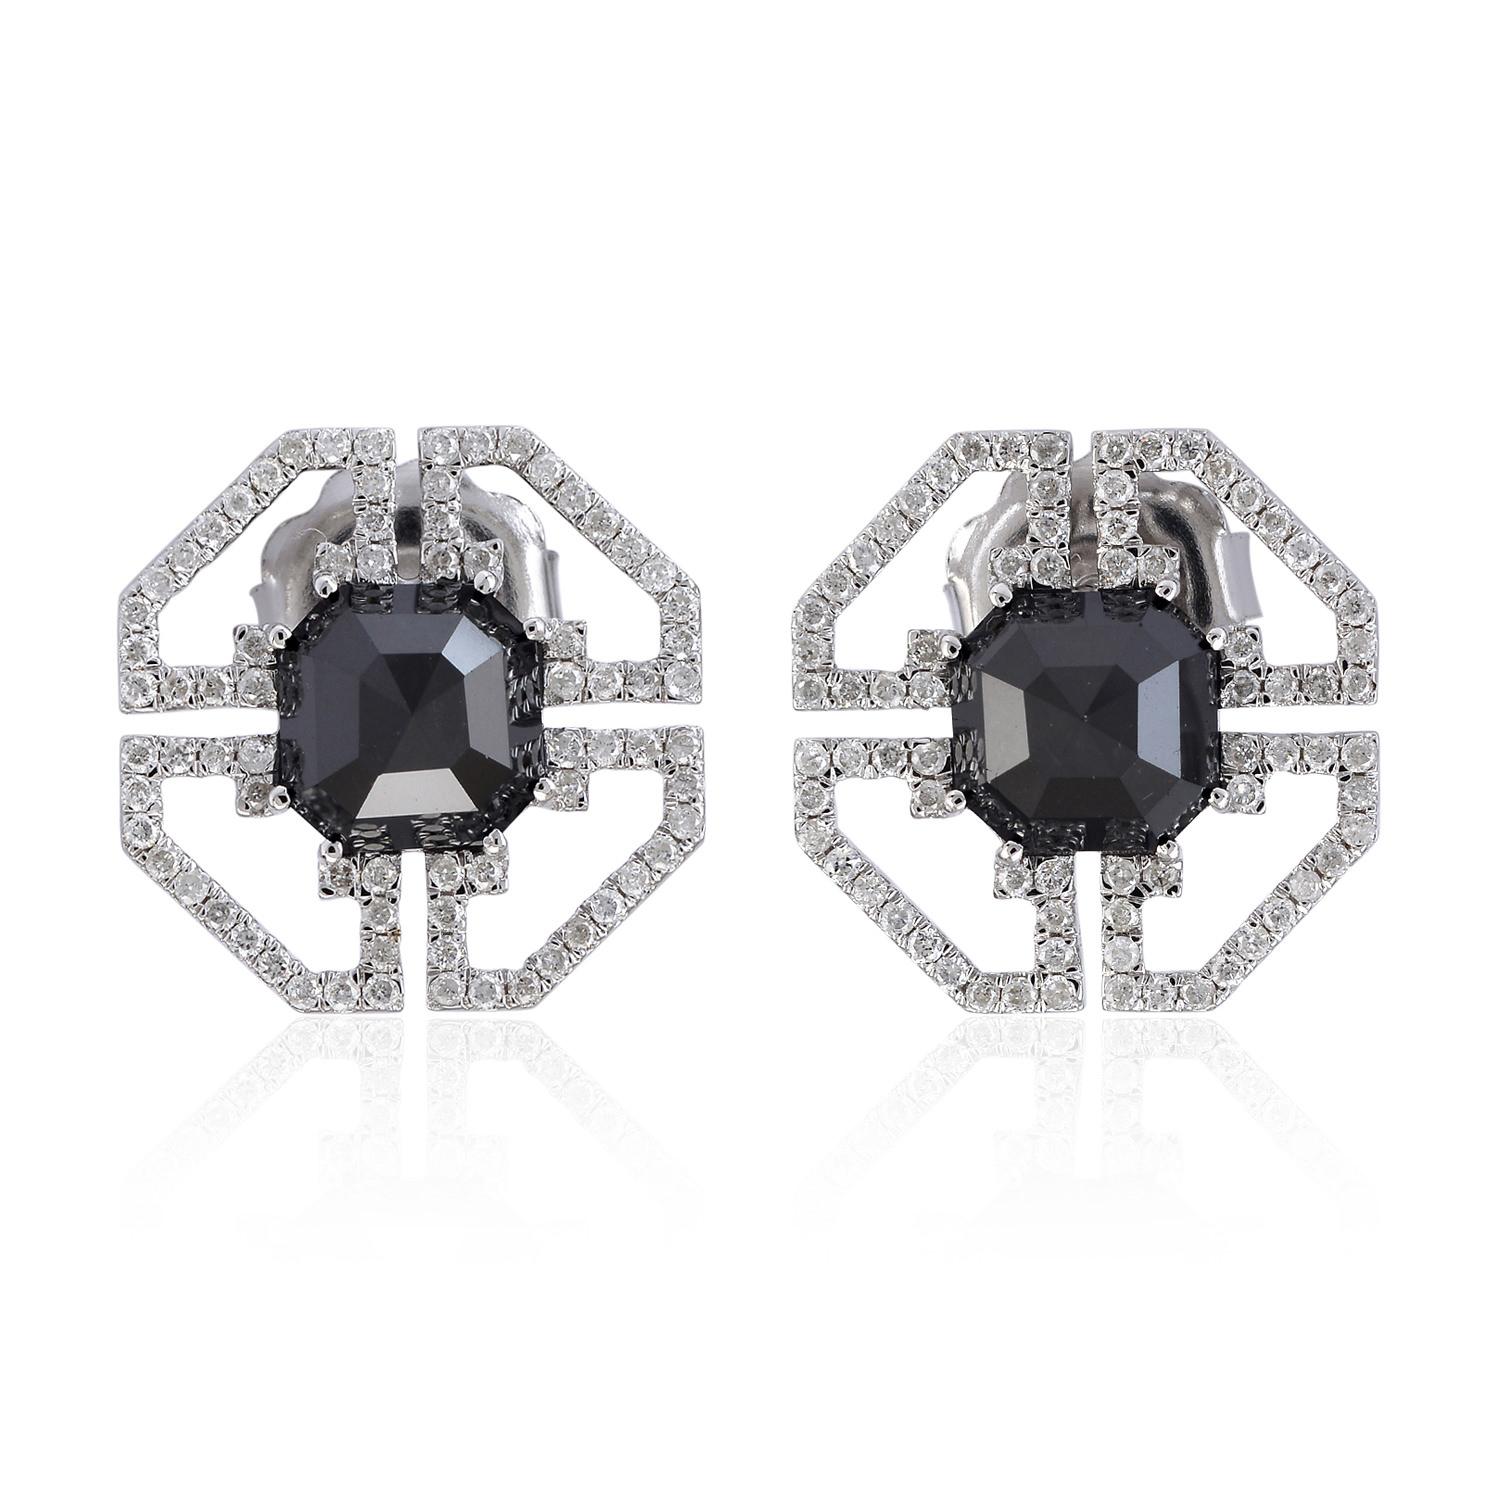 Art Deco Hexagon Shaped Studs With Center Black Diamond Surrounded by White Diamonds For Sale